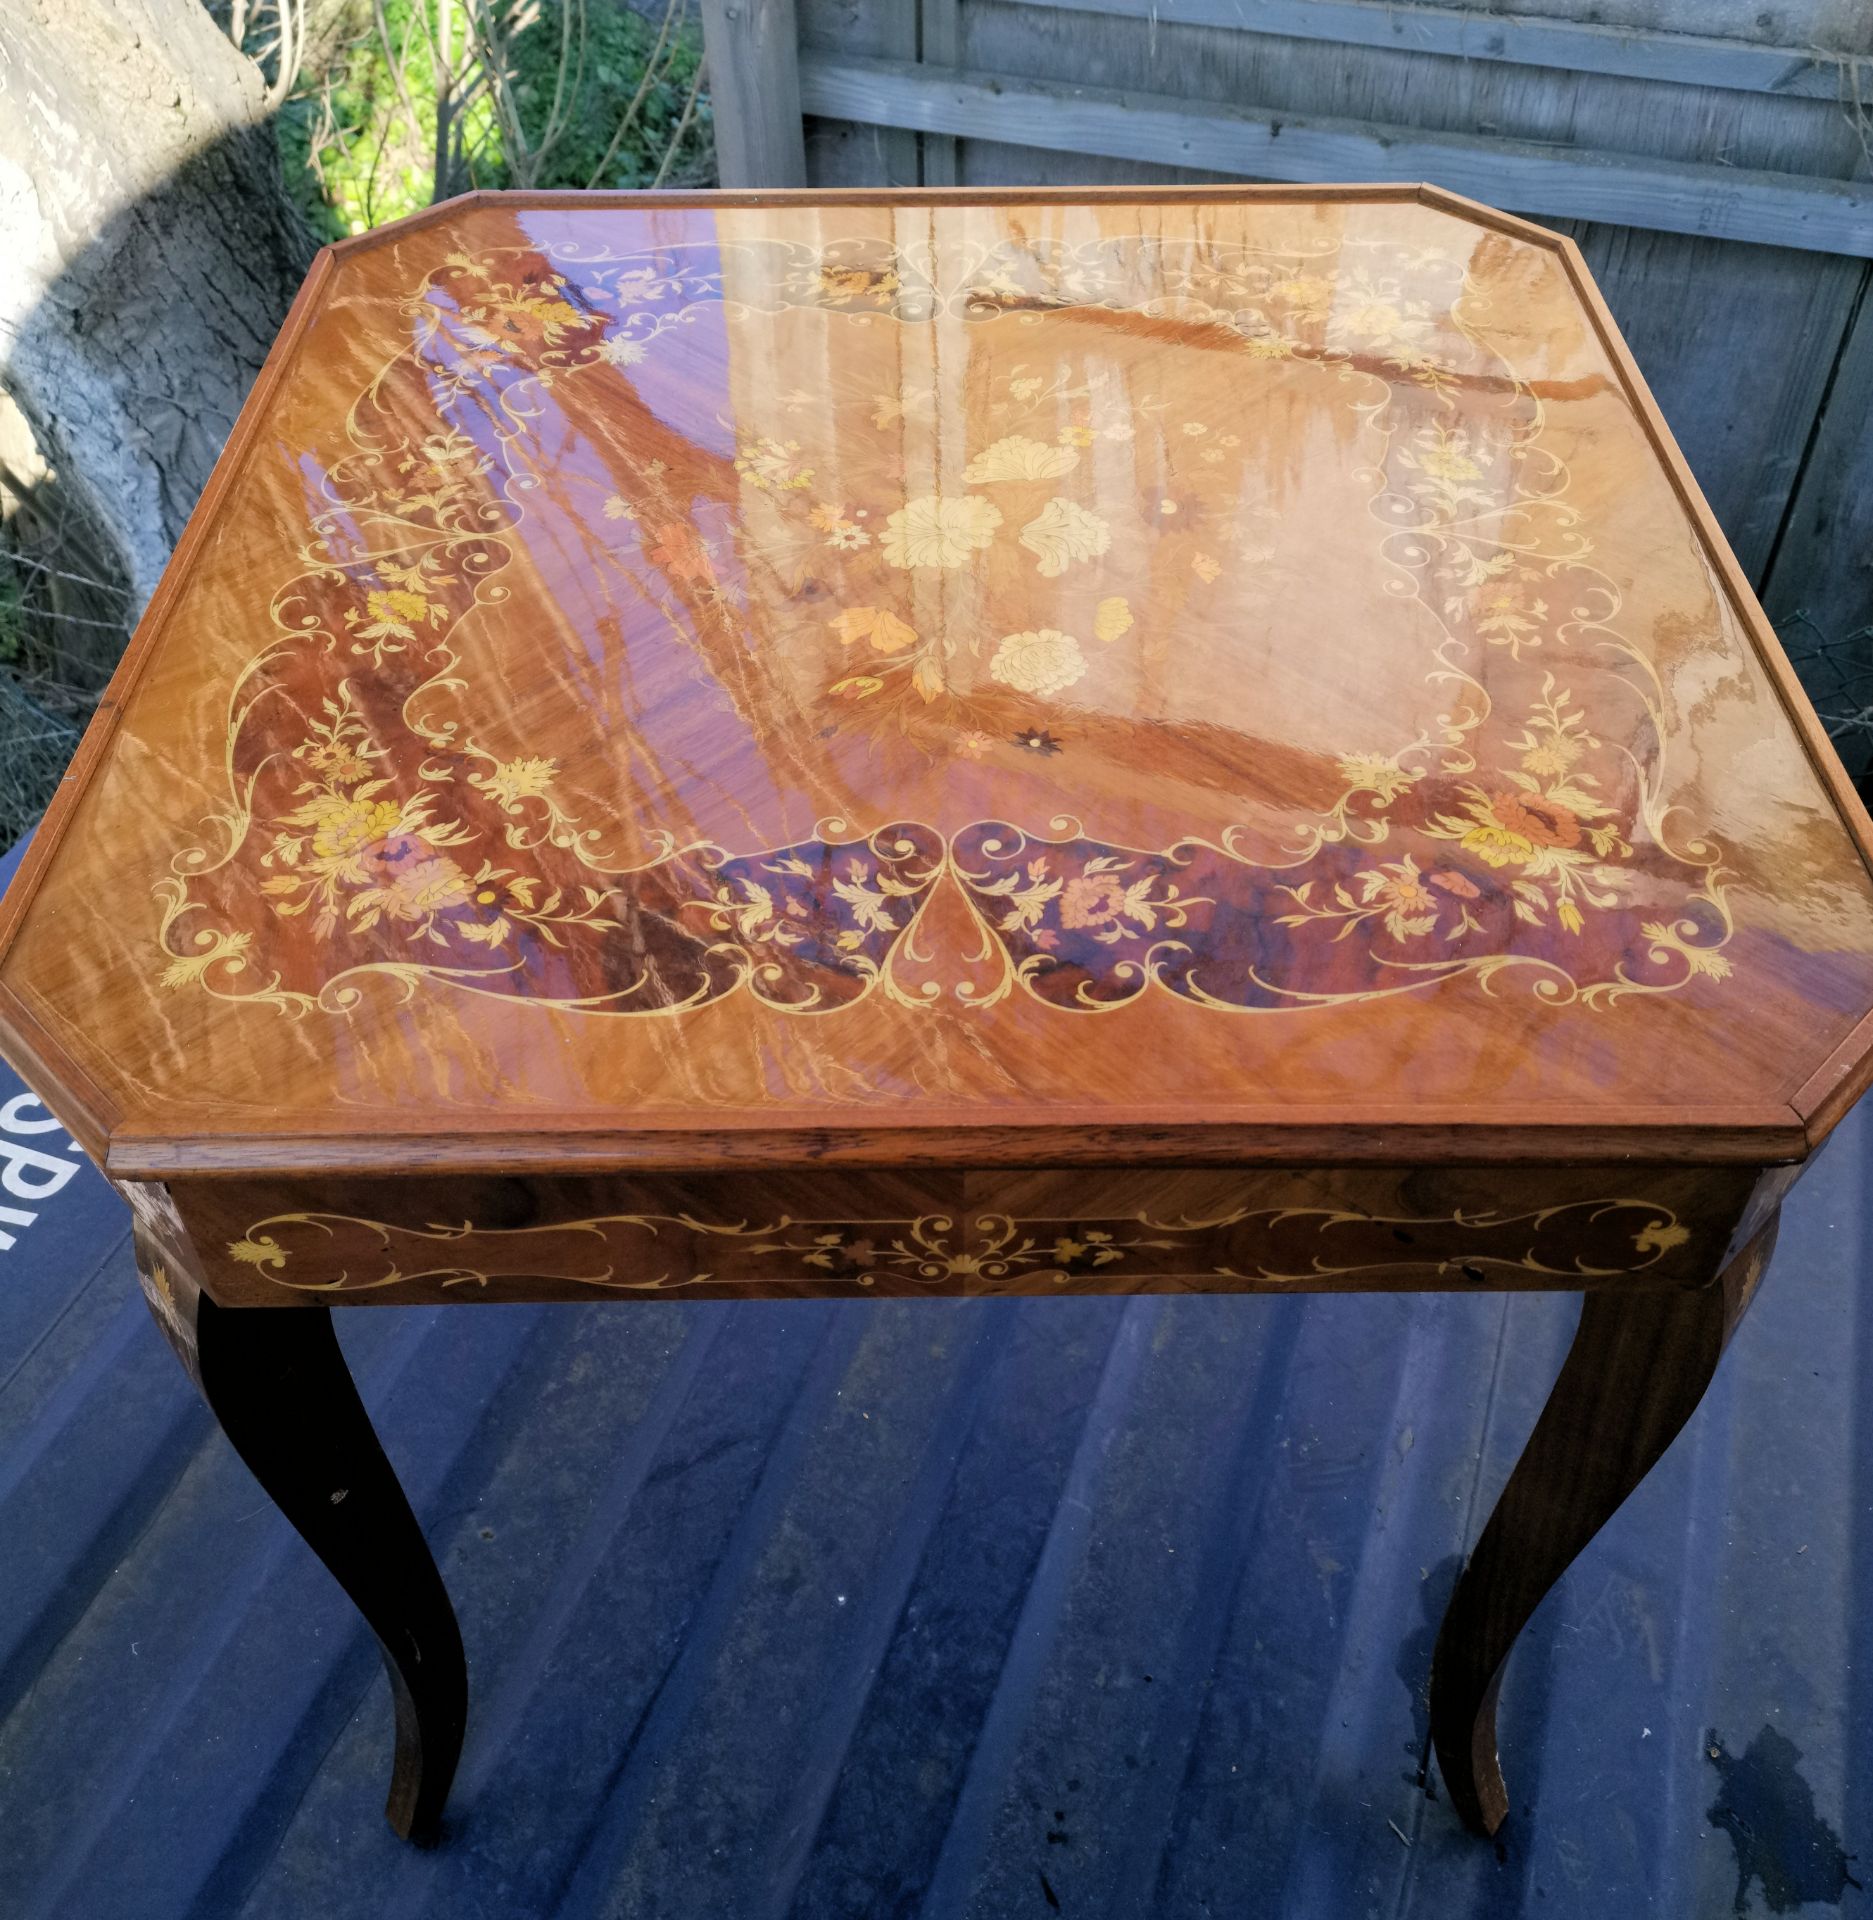 1 x Italian Marquetry Games Table - Dimensions: 780 x780 mm - CL355 - Location: Great Yarmouth - Image 6 of 6